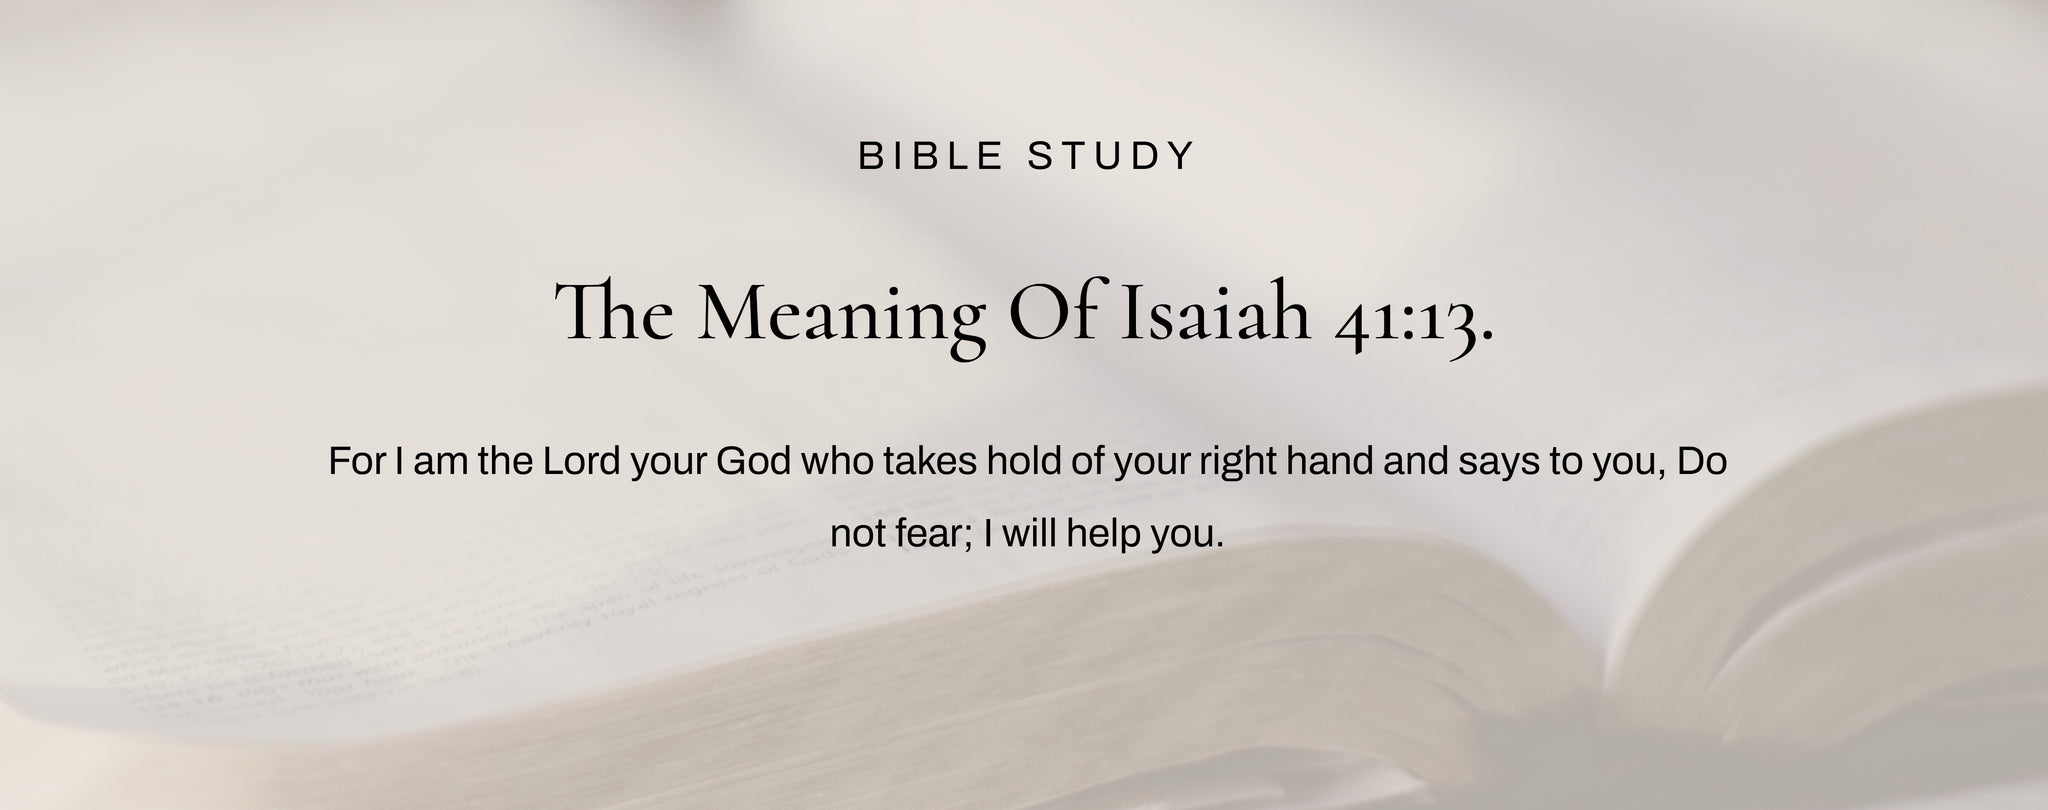 What Does Isaiah 41: 13 Mean?